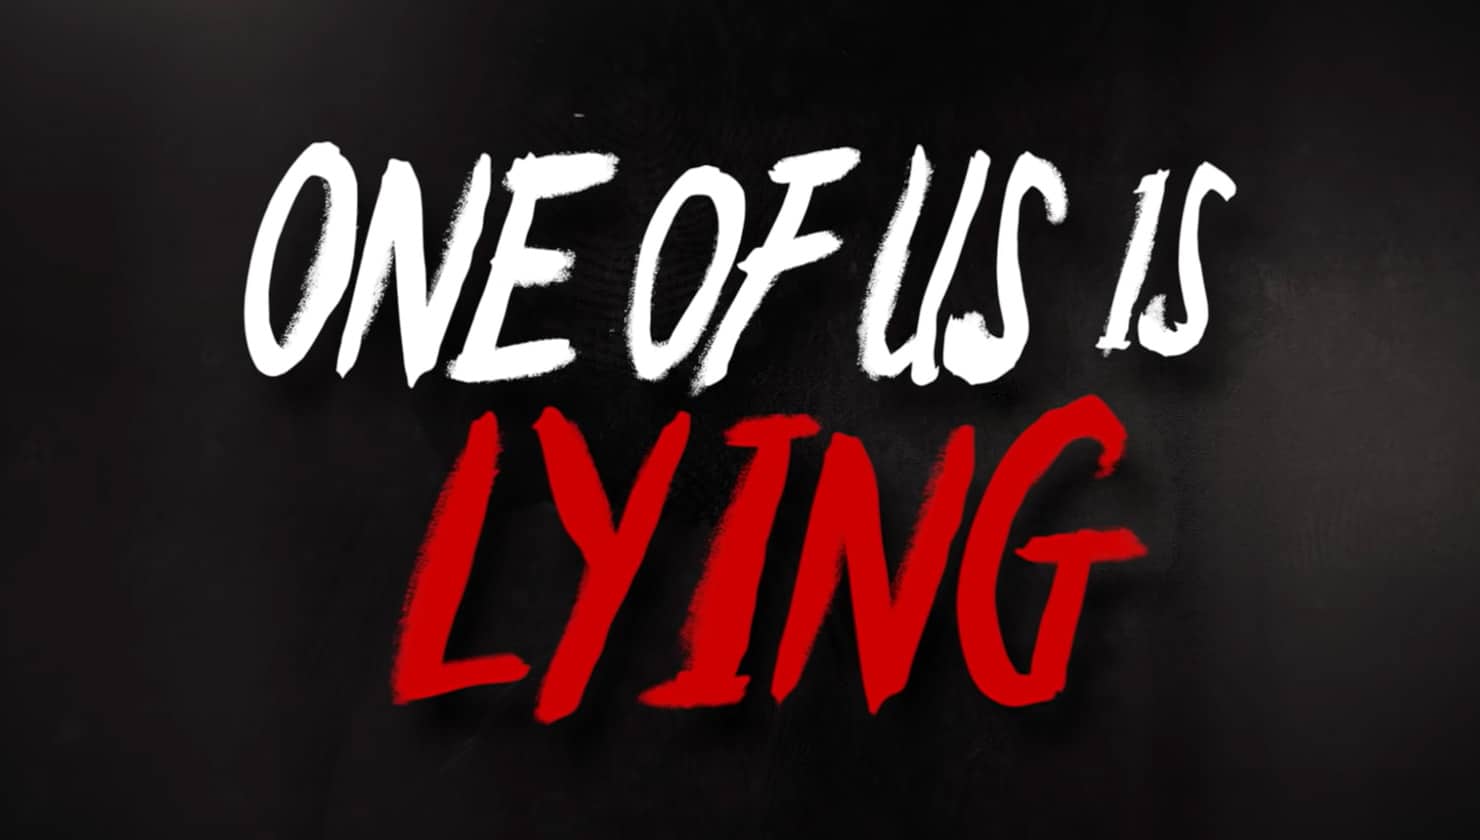 How much do you know about “One of us is lying?”